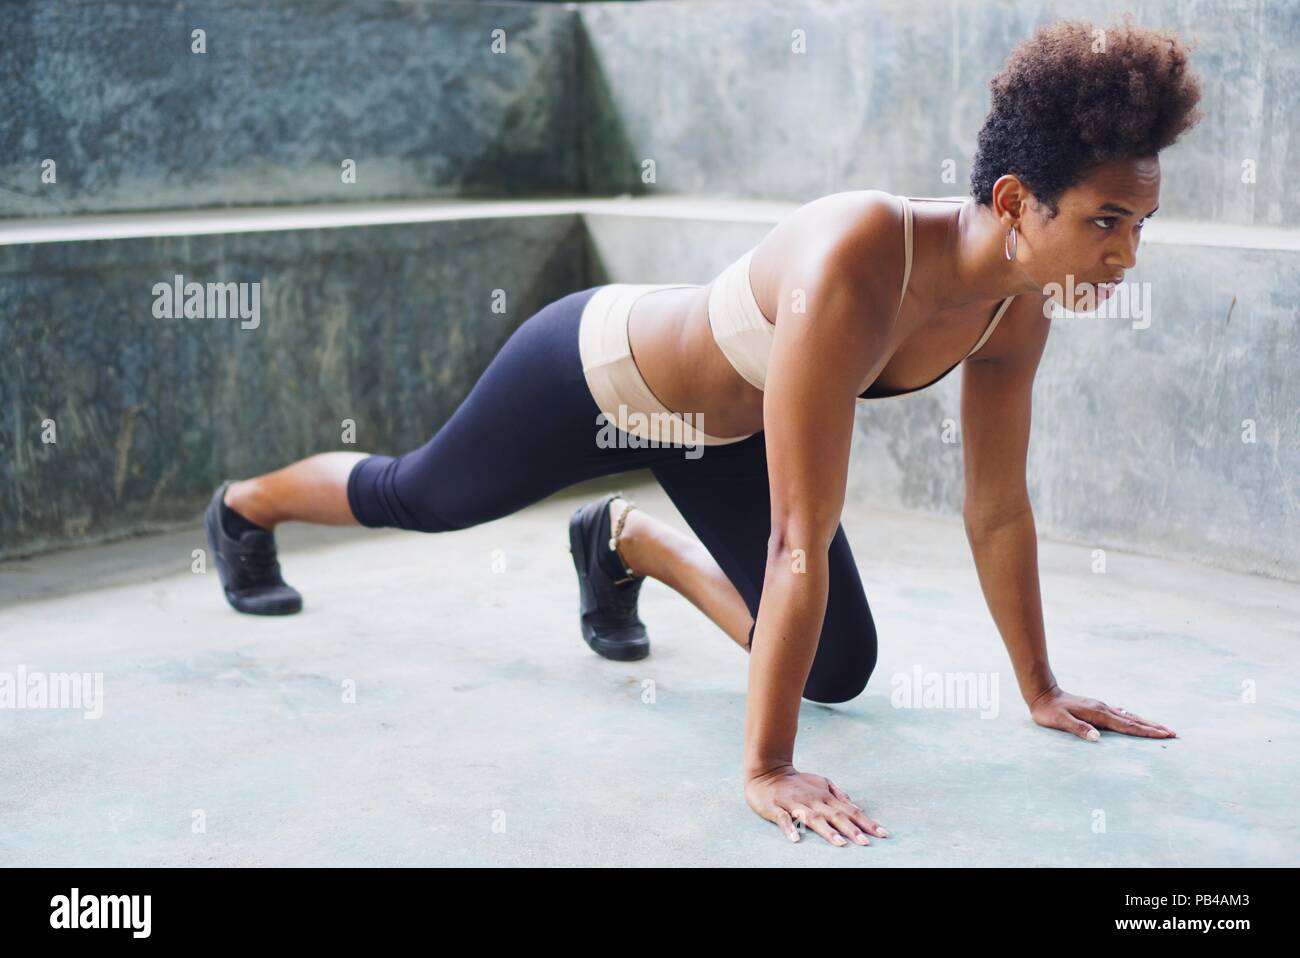 Melanesian pacific islander athlete girl with afro performing exercising routines plank with twist, one hand raised Stock Photo